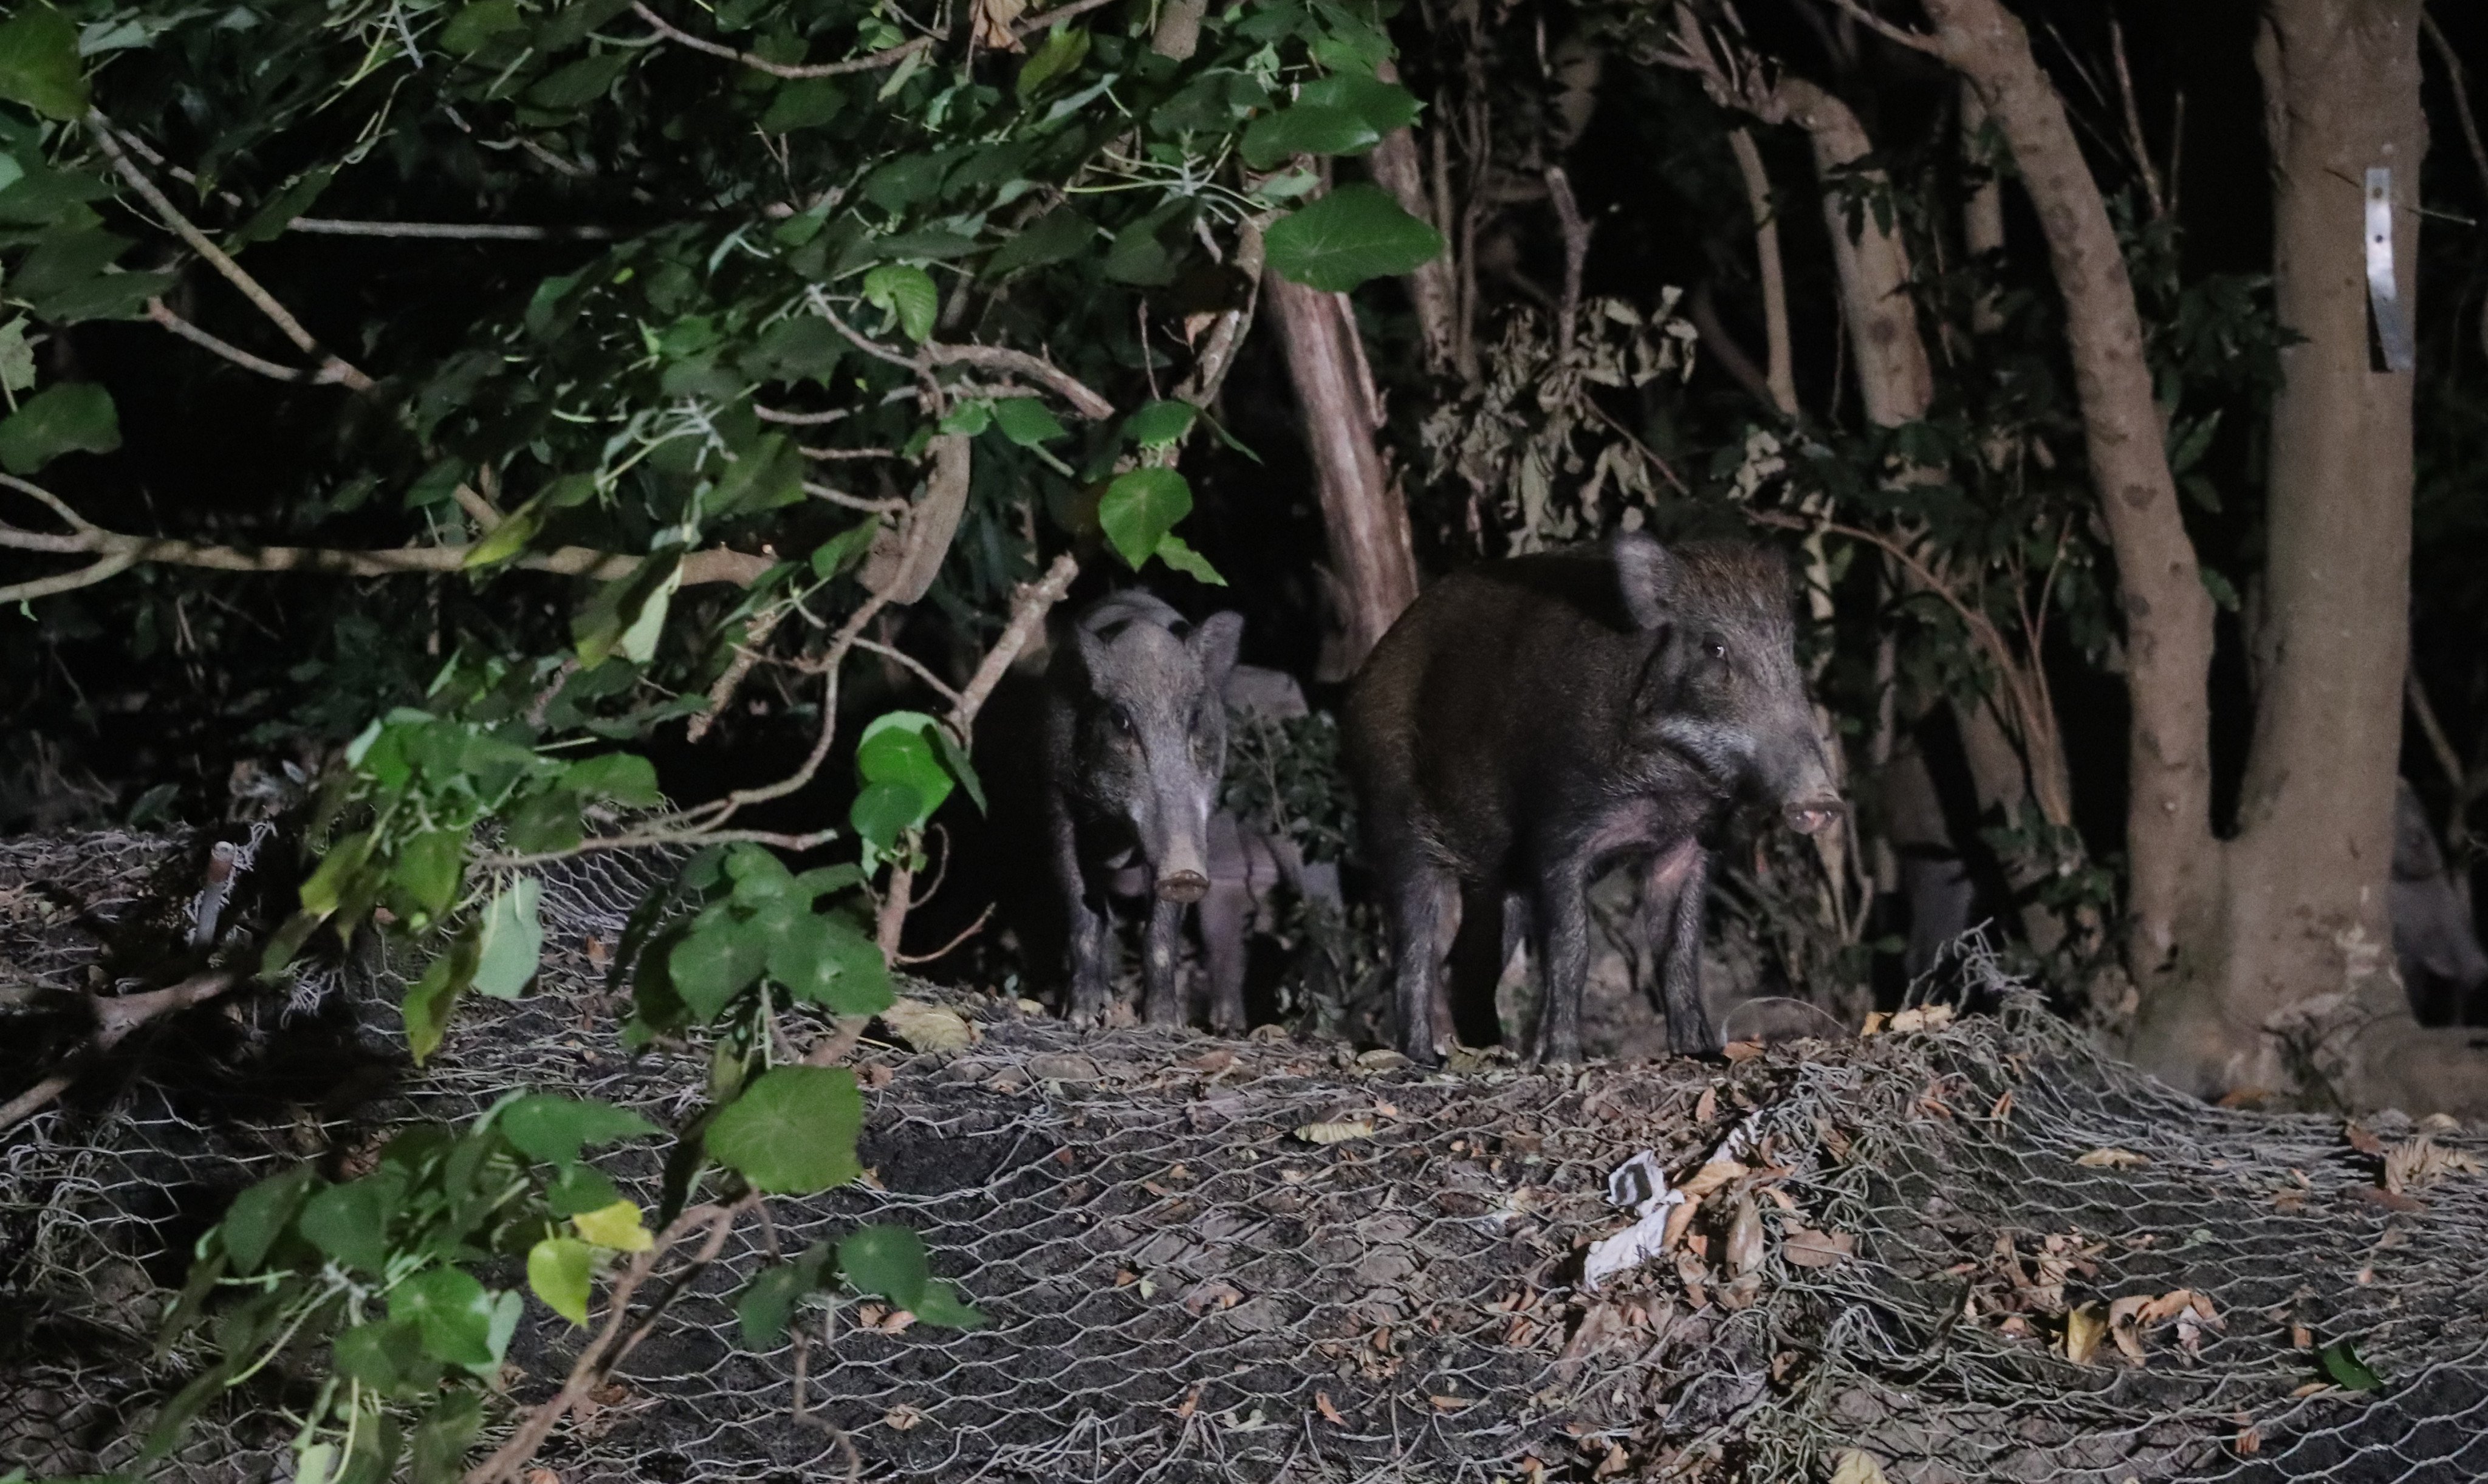 Sightings of wild boars in urban areas have been more common in recent years. Photo: Edmond So